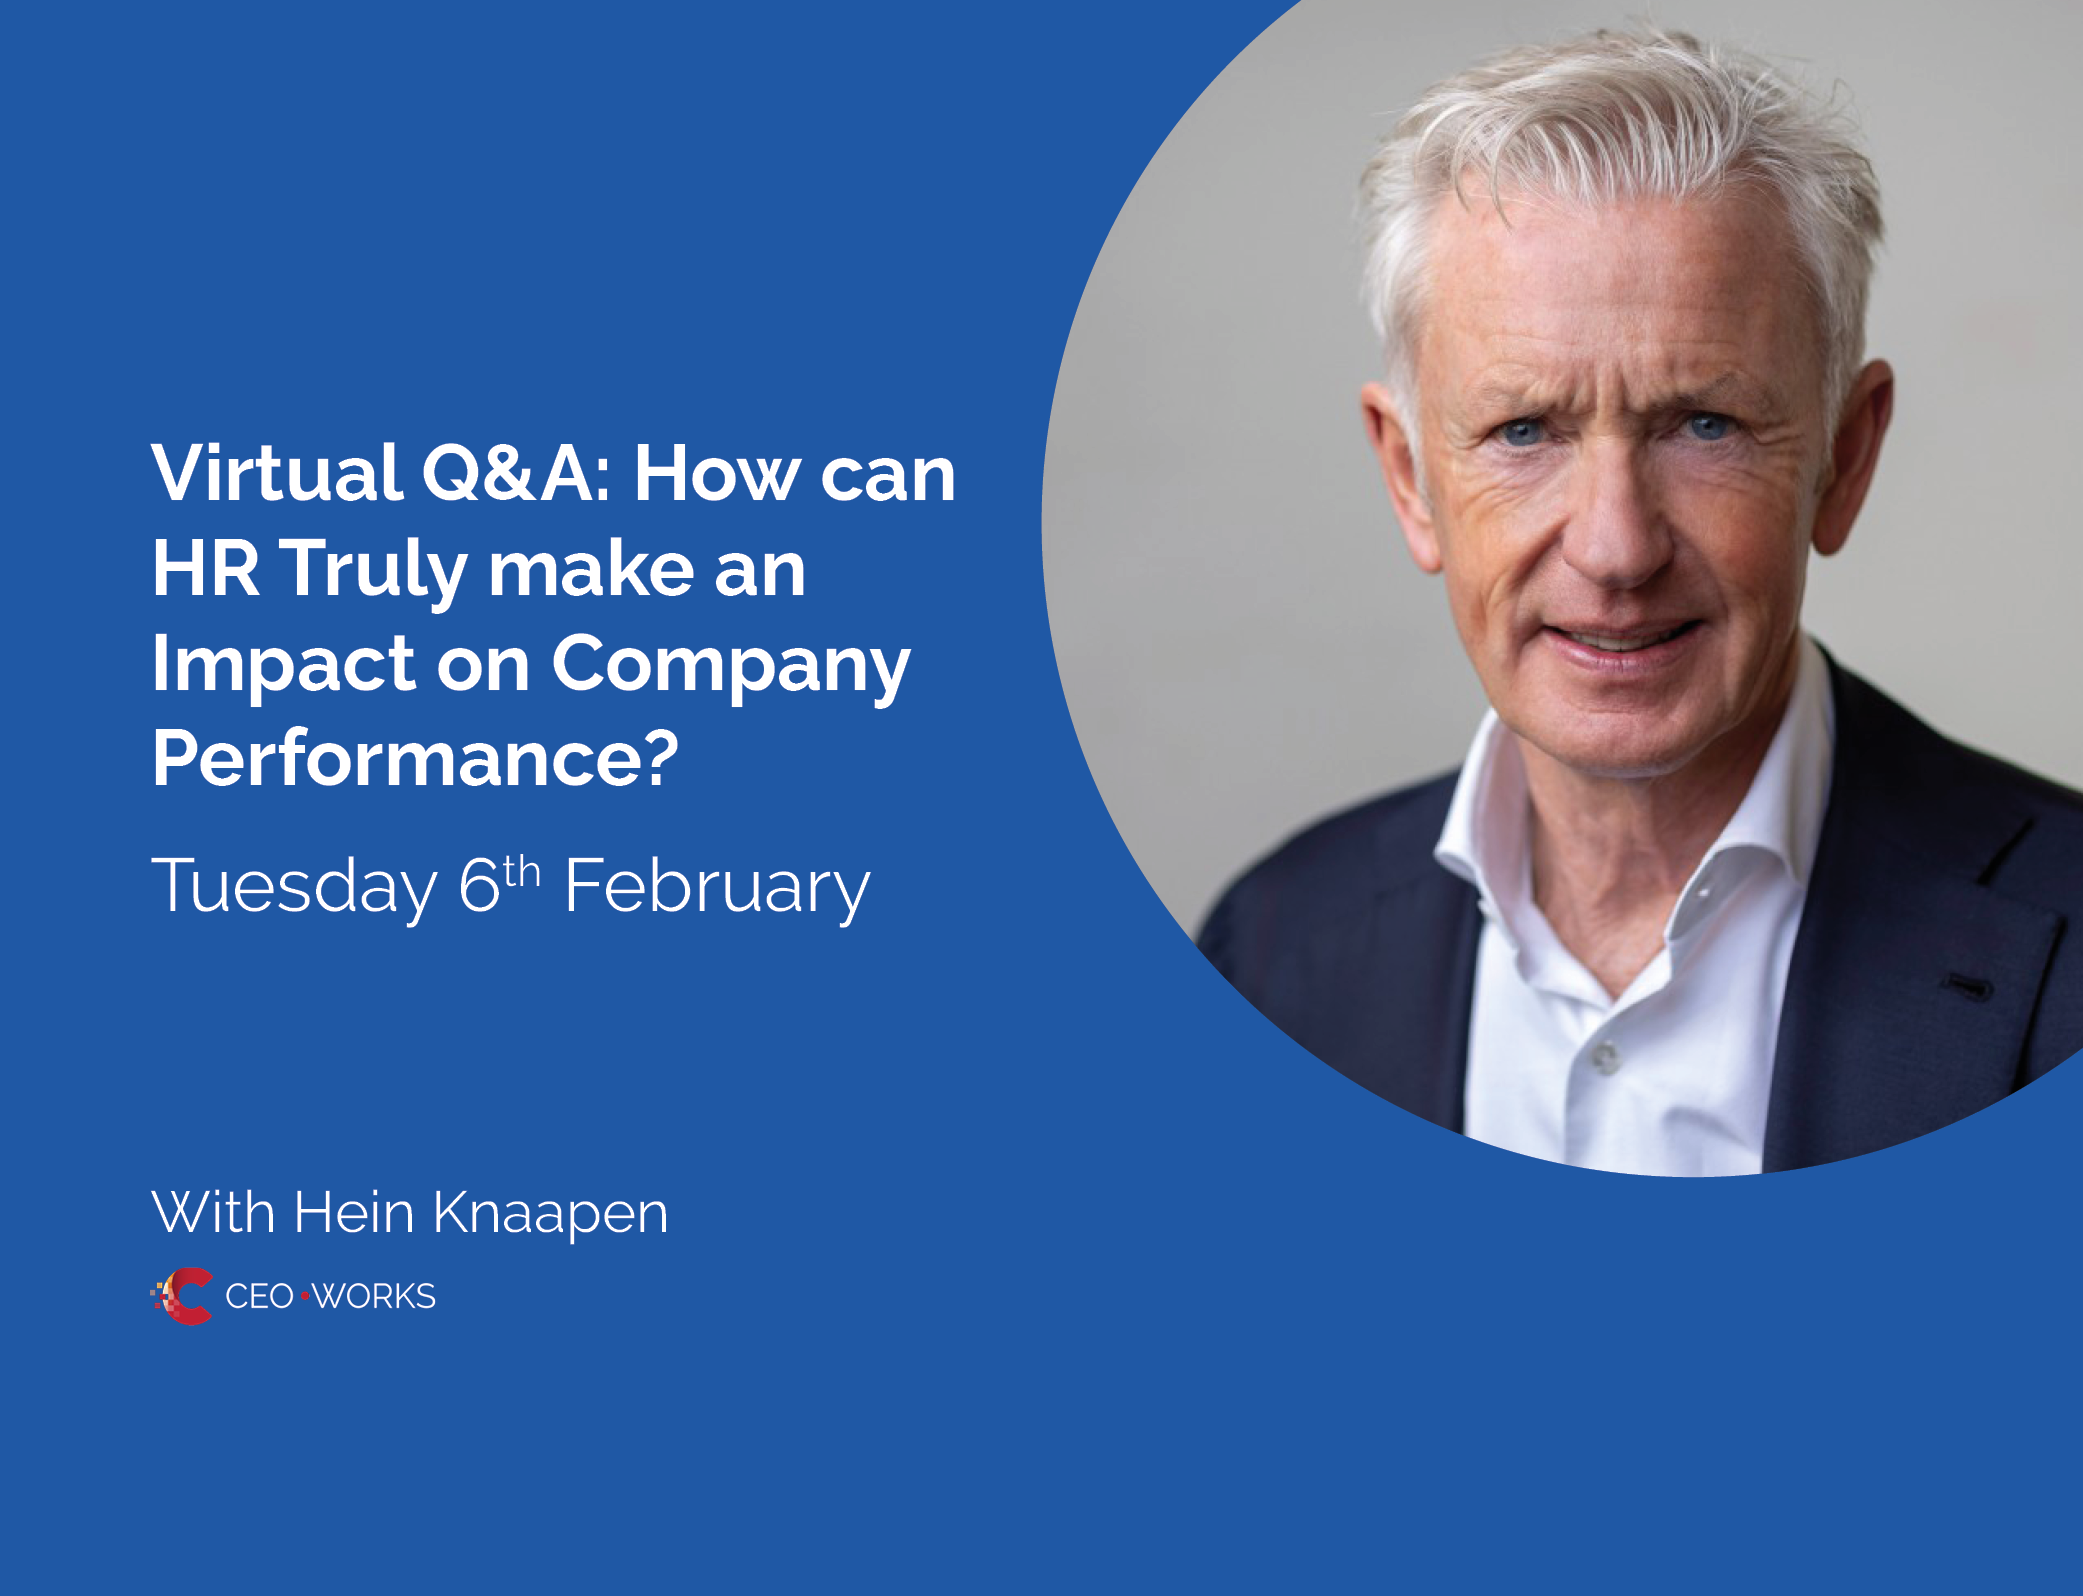 The Impact of HR on Company Performance